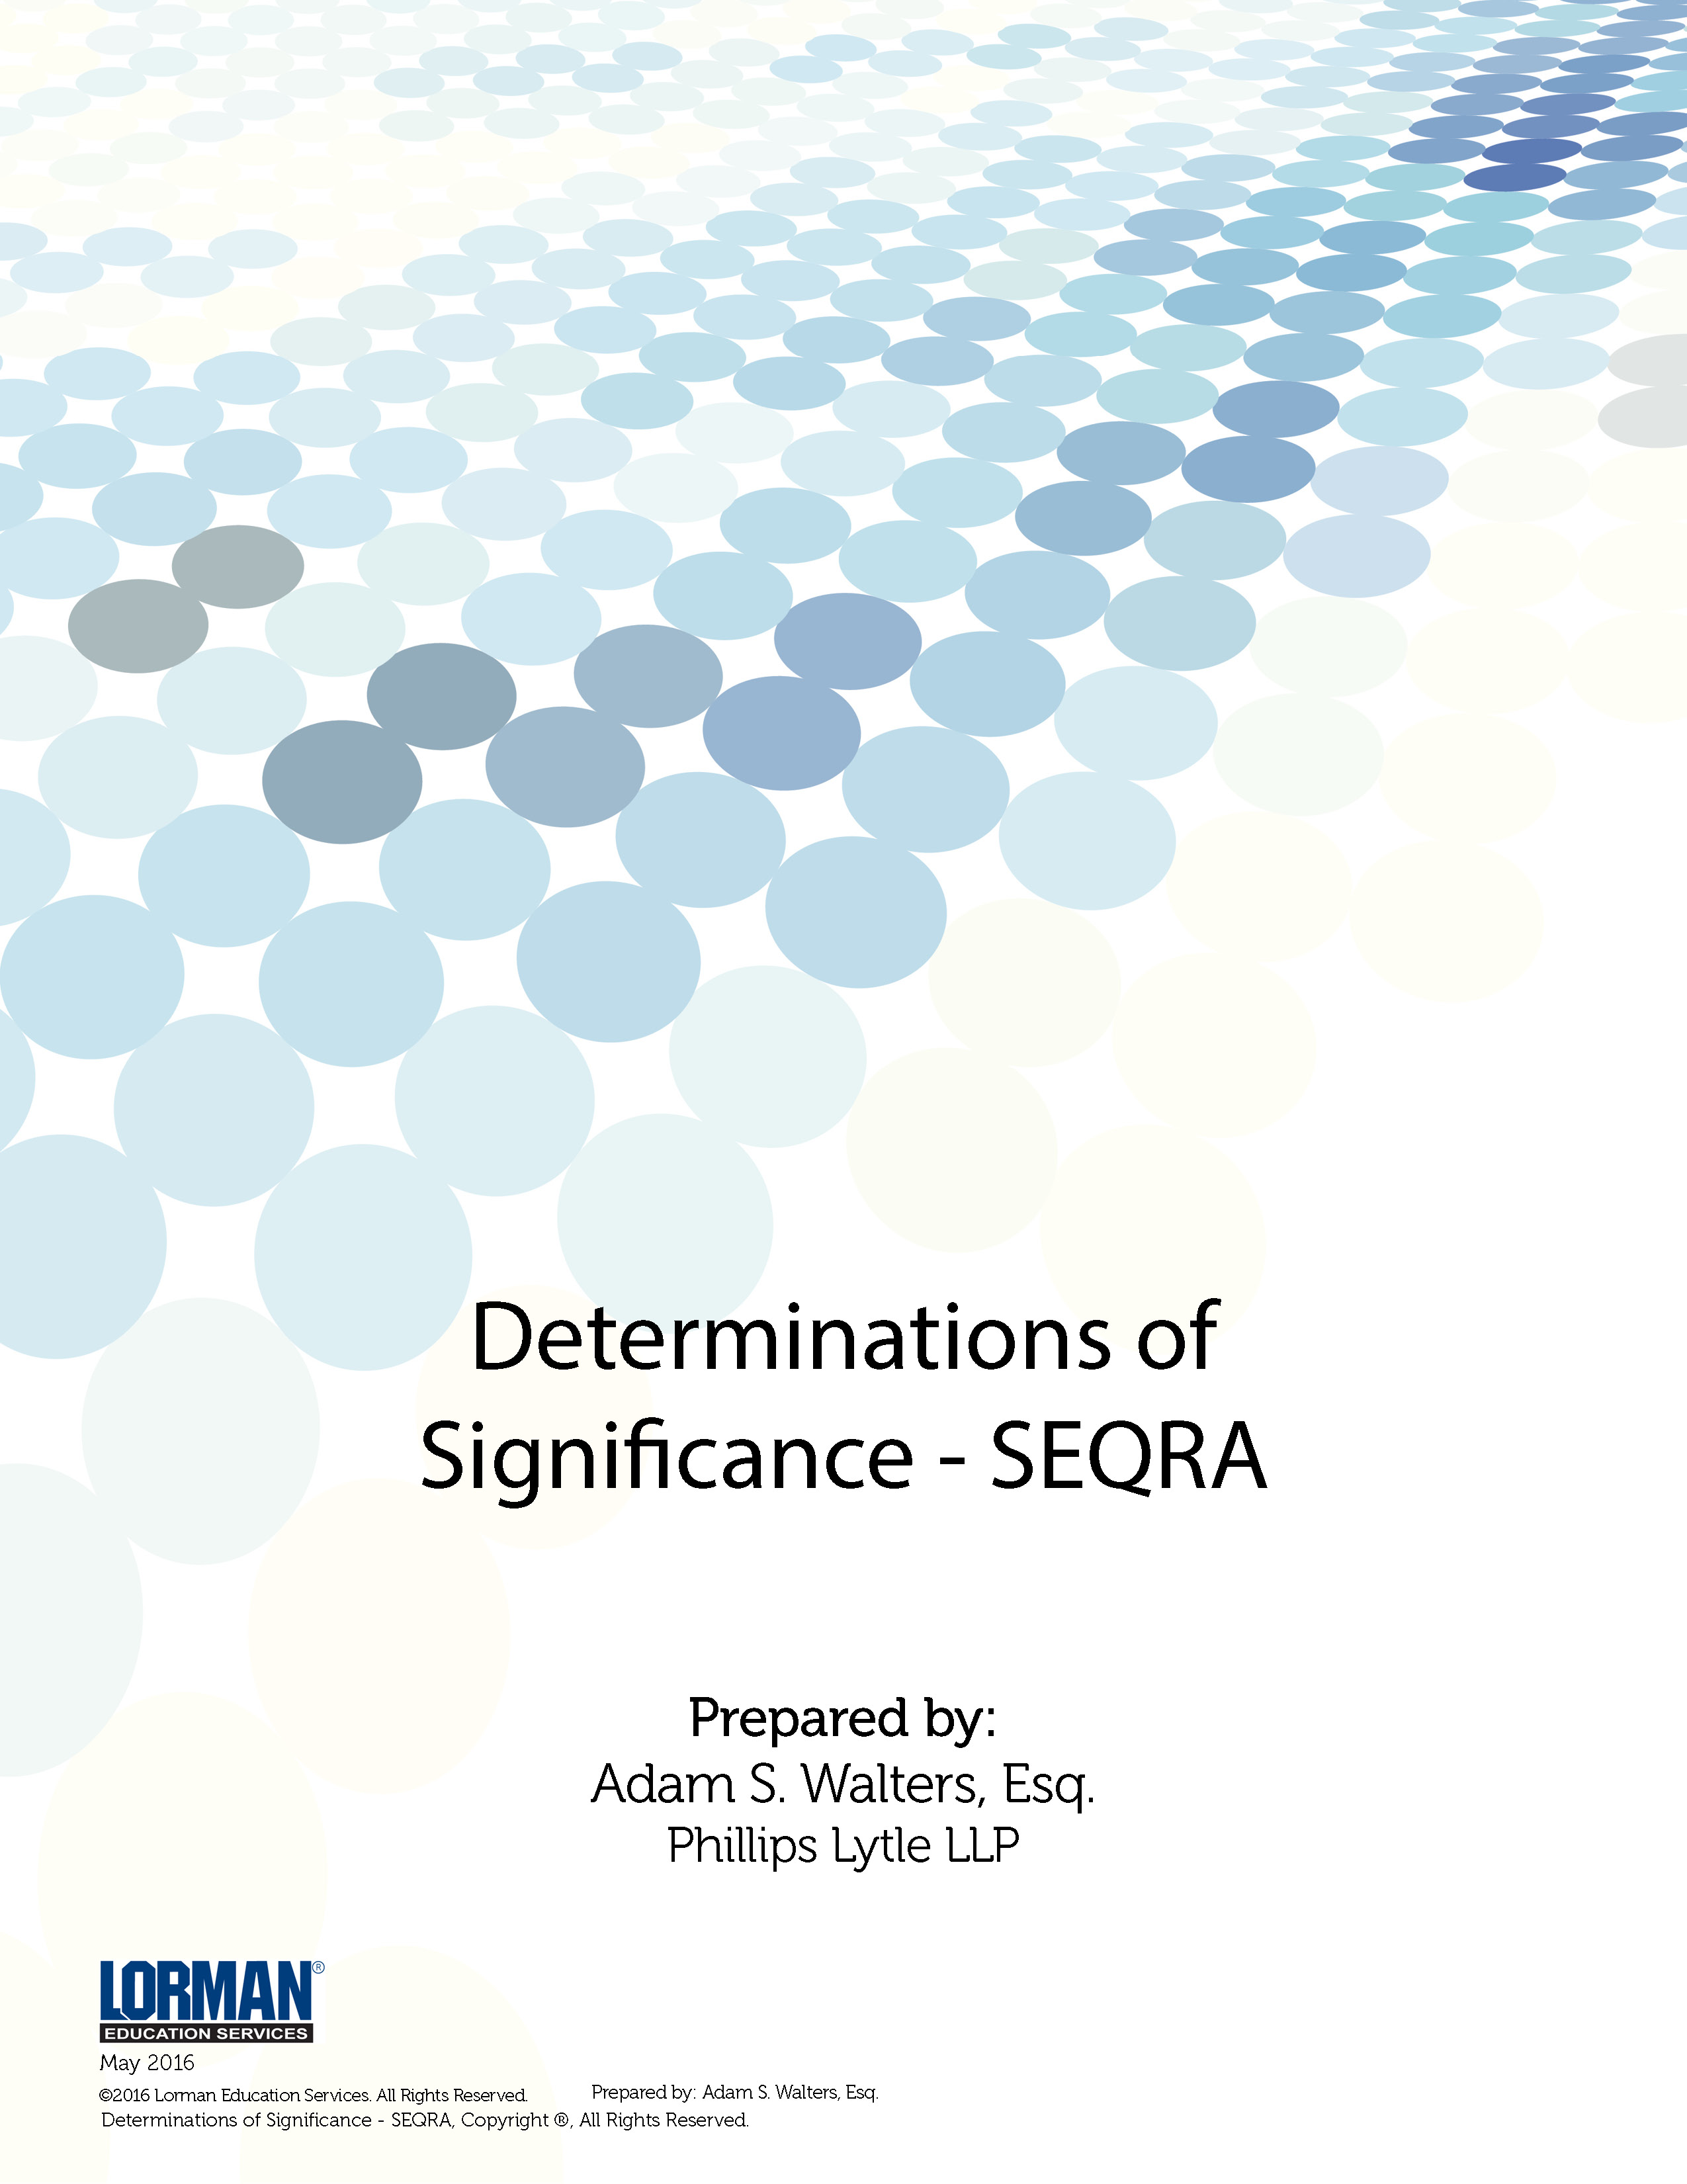 Determinations of Significance - SEQRA